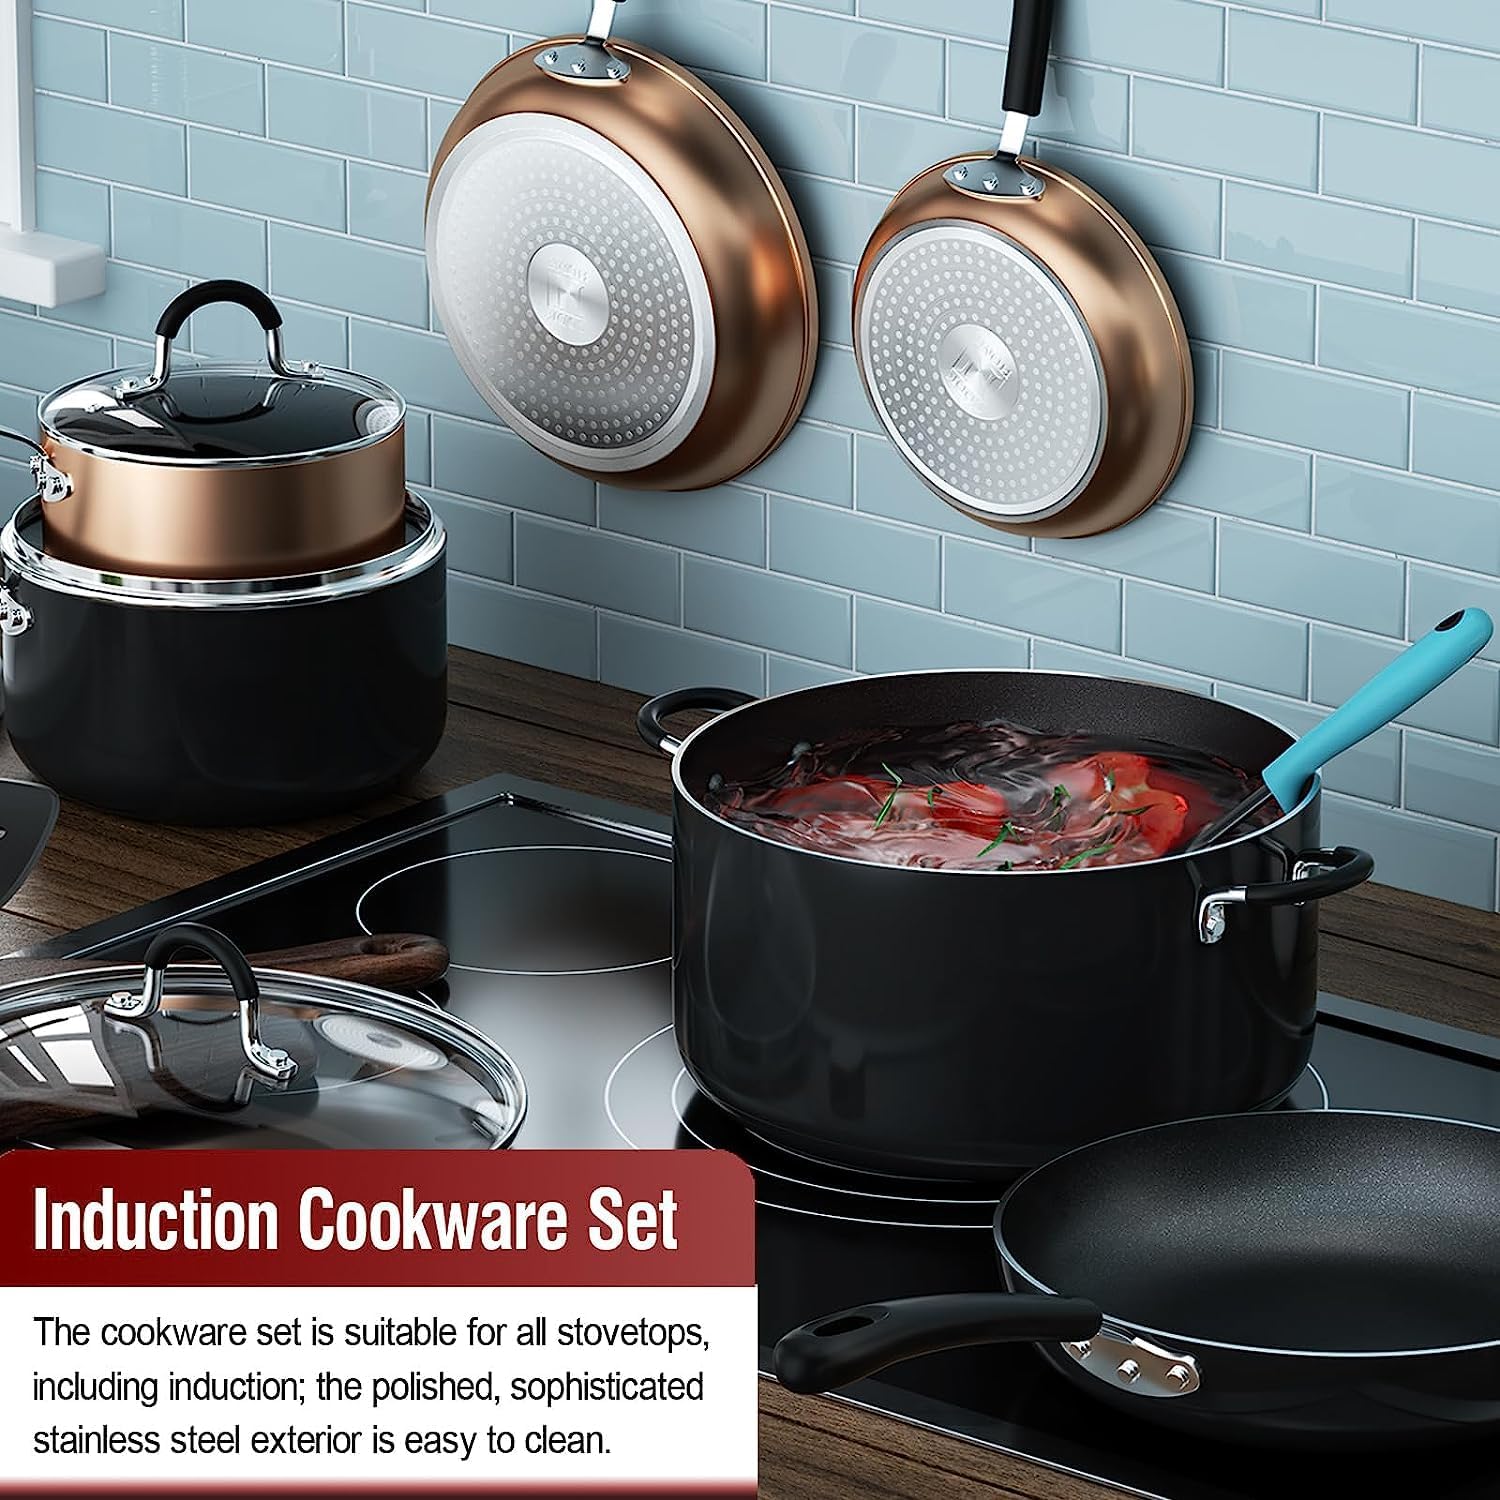 Cook N Home 8/10/12 3 Pieces Frying Saute Pan Set with Non